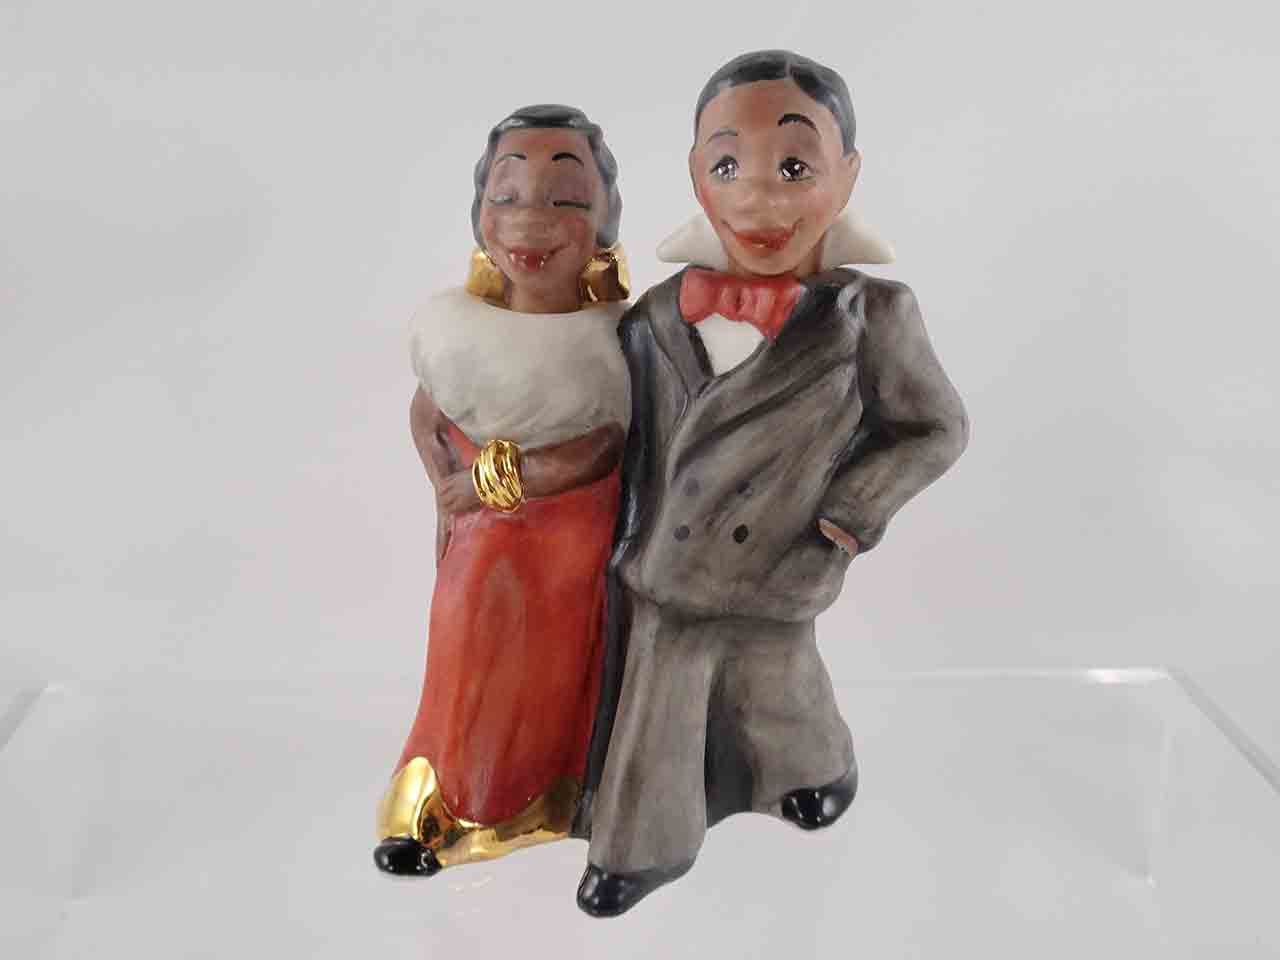 Harlem Nights salt and pepper shakers by Allyson Nagel